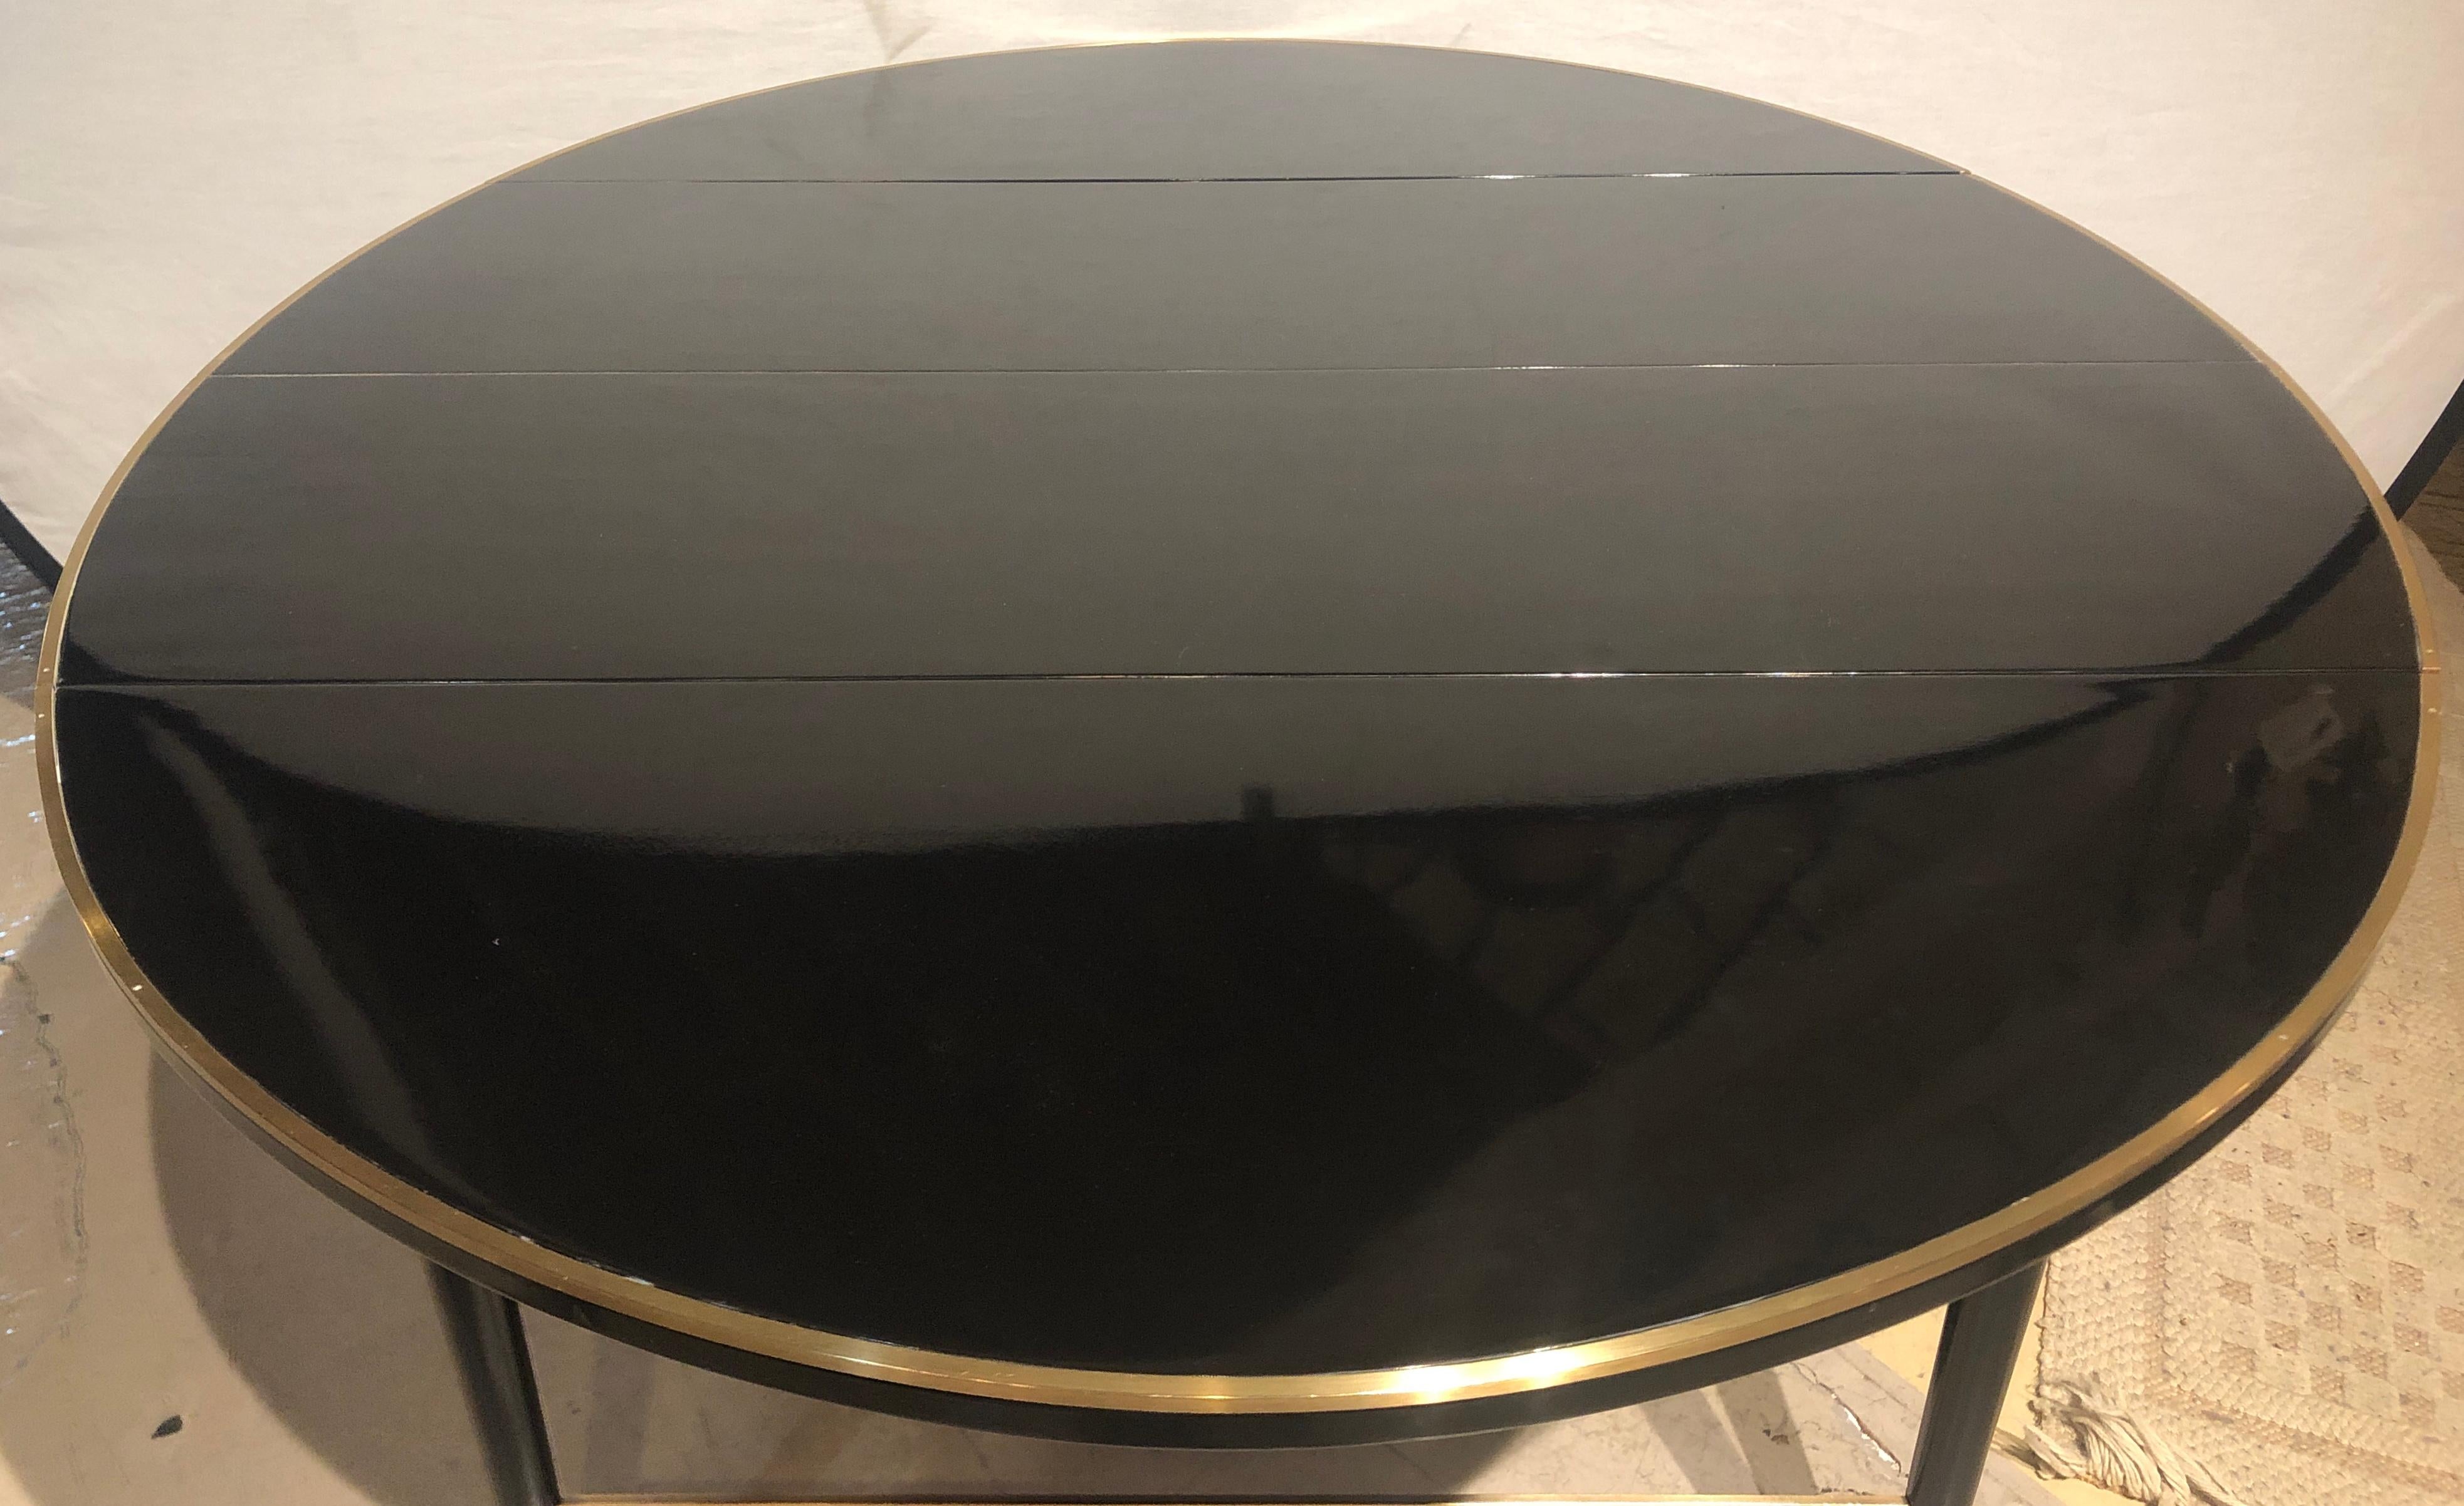 Bronze Mid-Century Modern Black Lacquered Paul McCobb Serving / Dining Table 5 Leaves